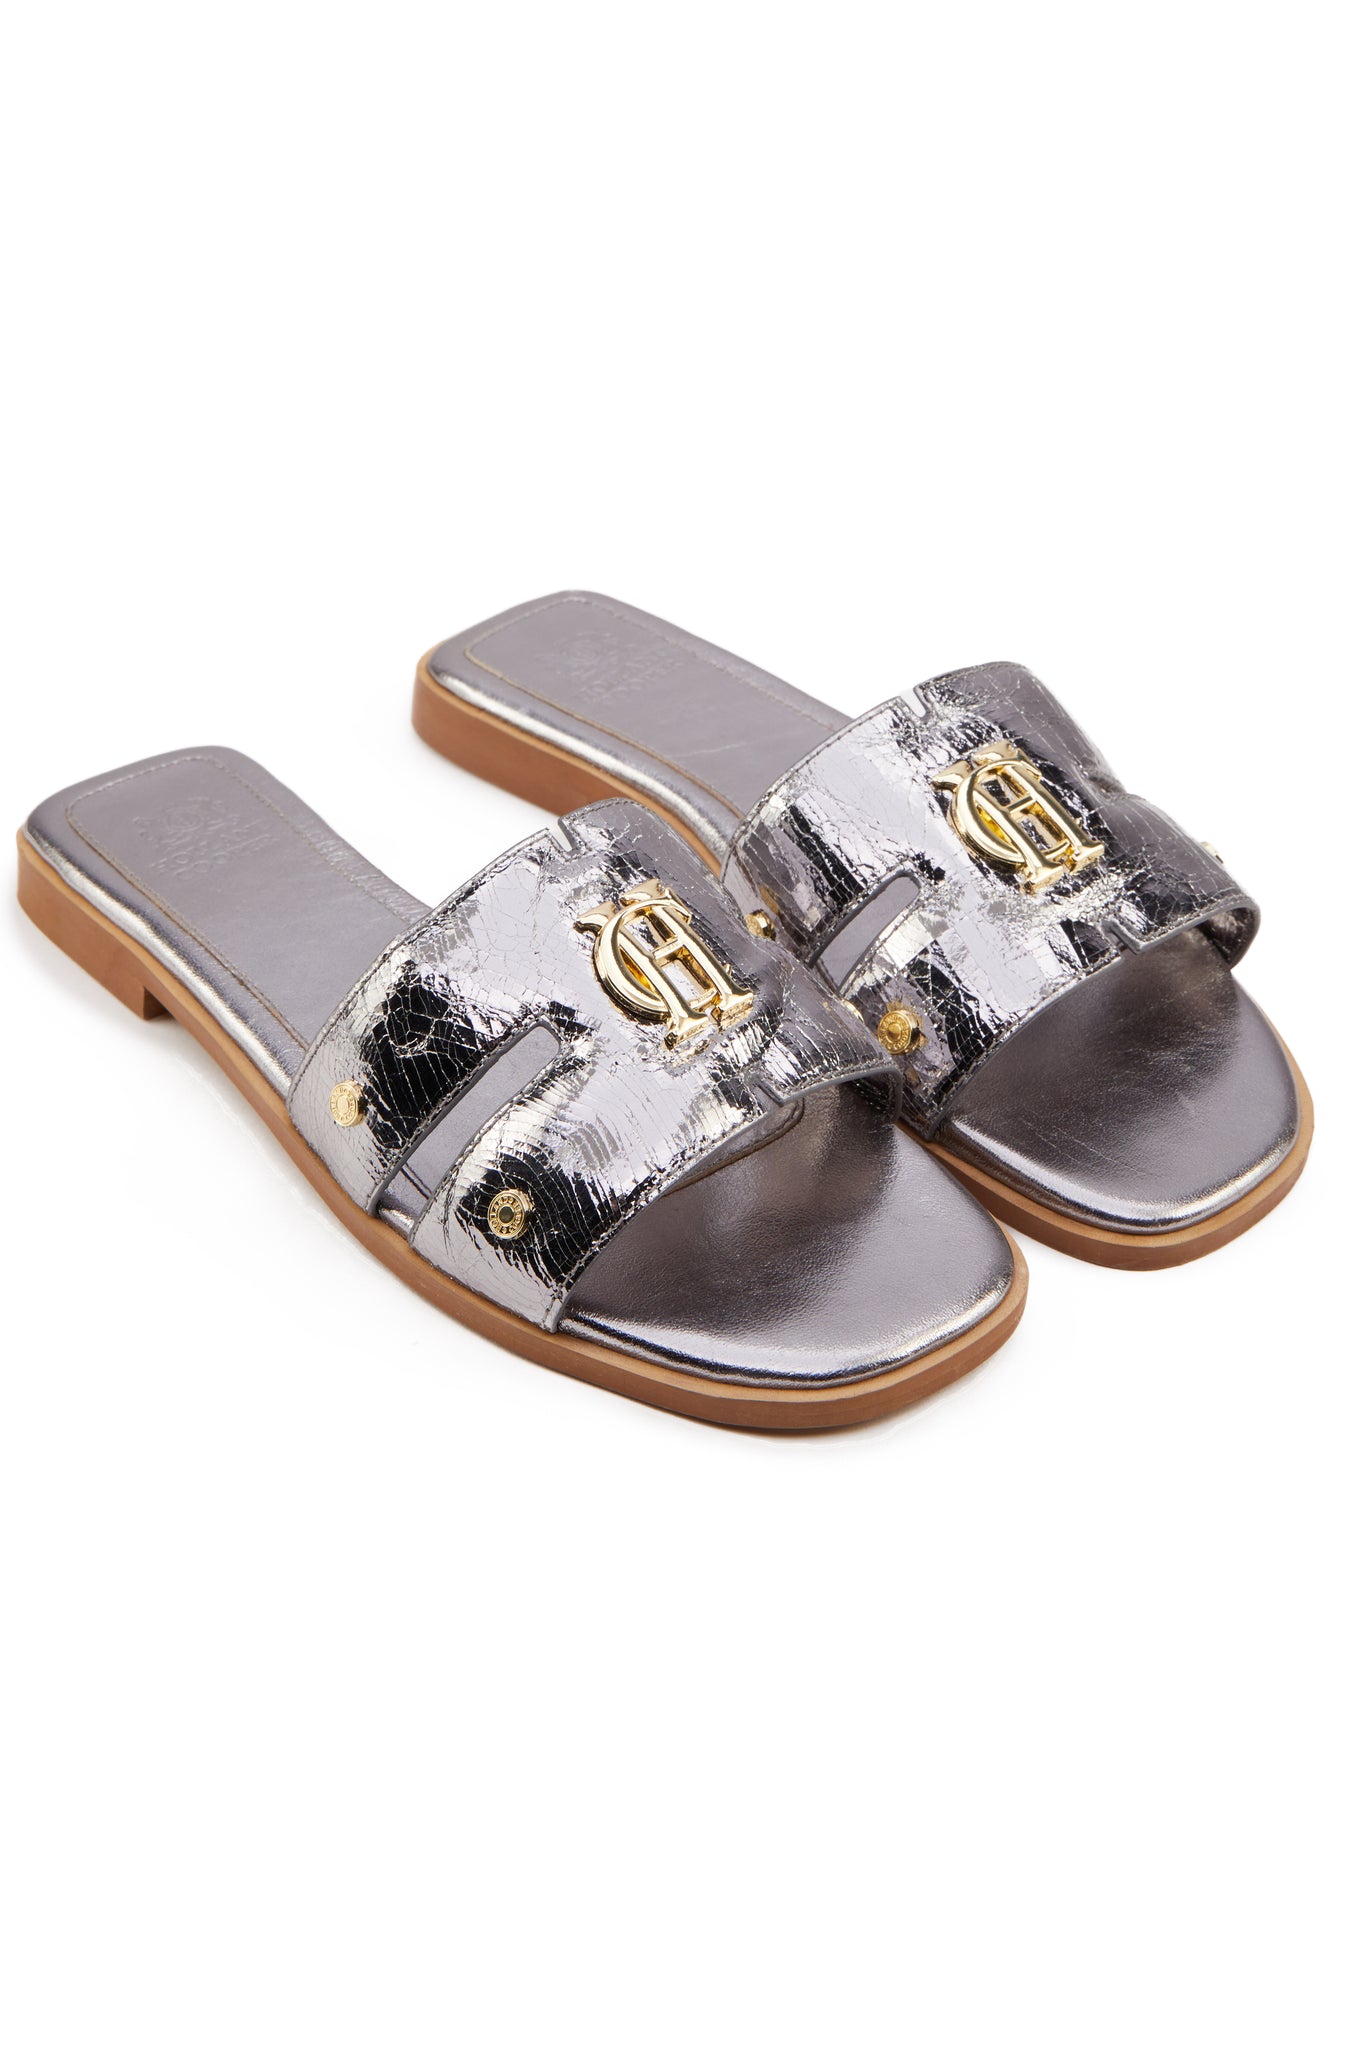 Silver leather sliders with crackled effect and a tan leather sole and gold hardware